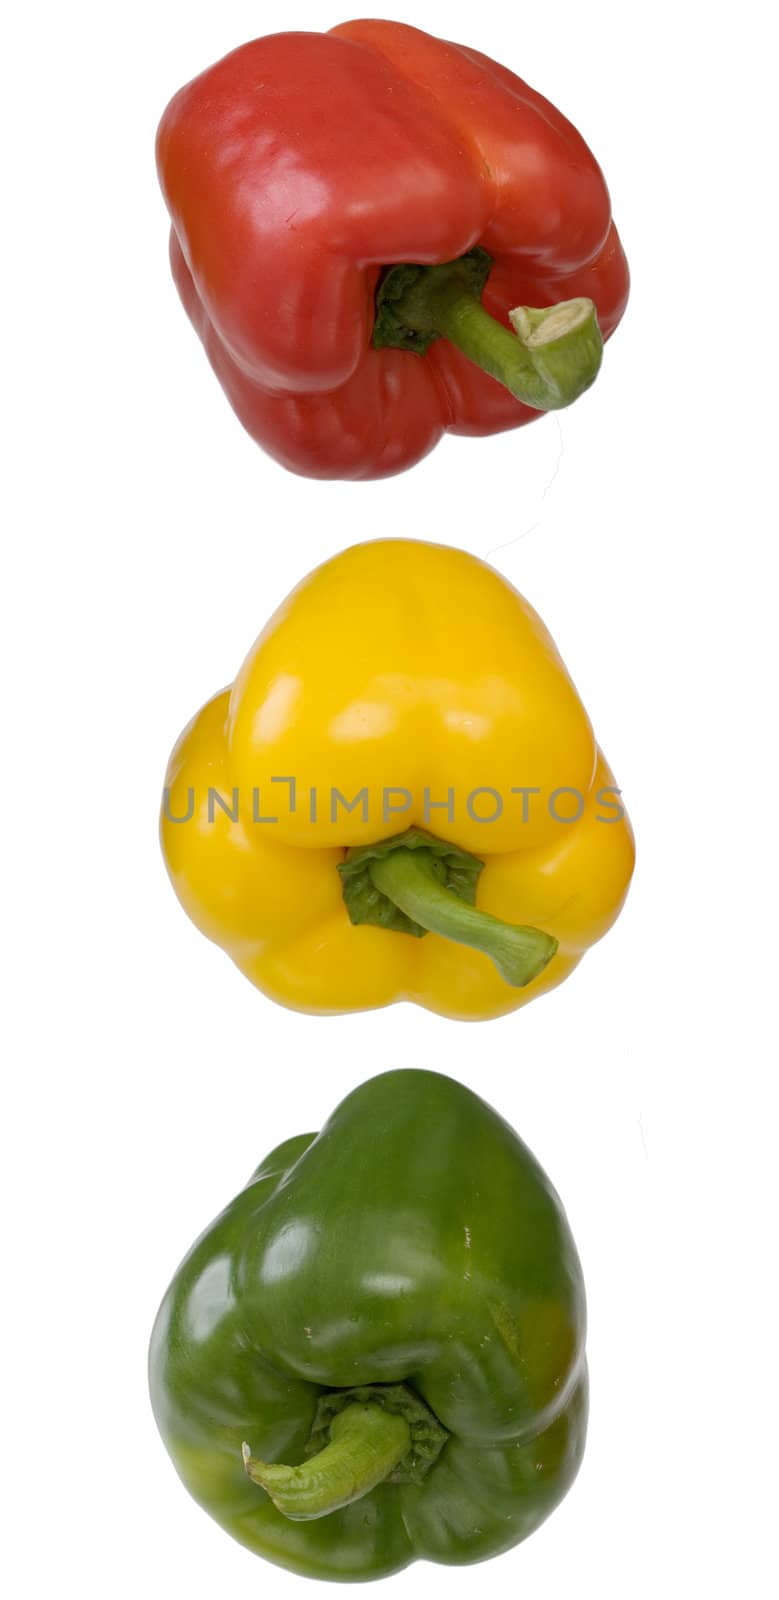 Three clean washed Bulgarian pepper with the torn off handles